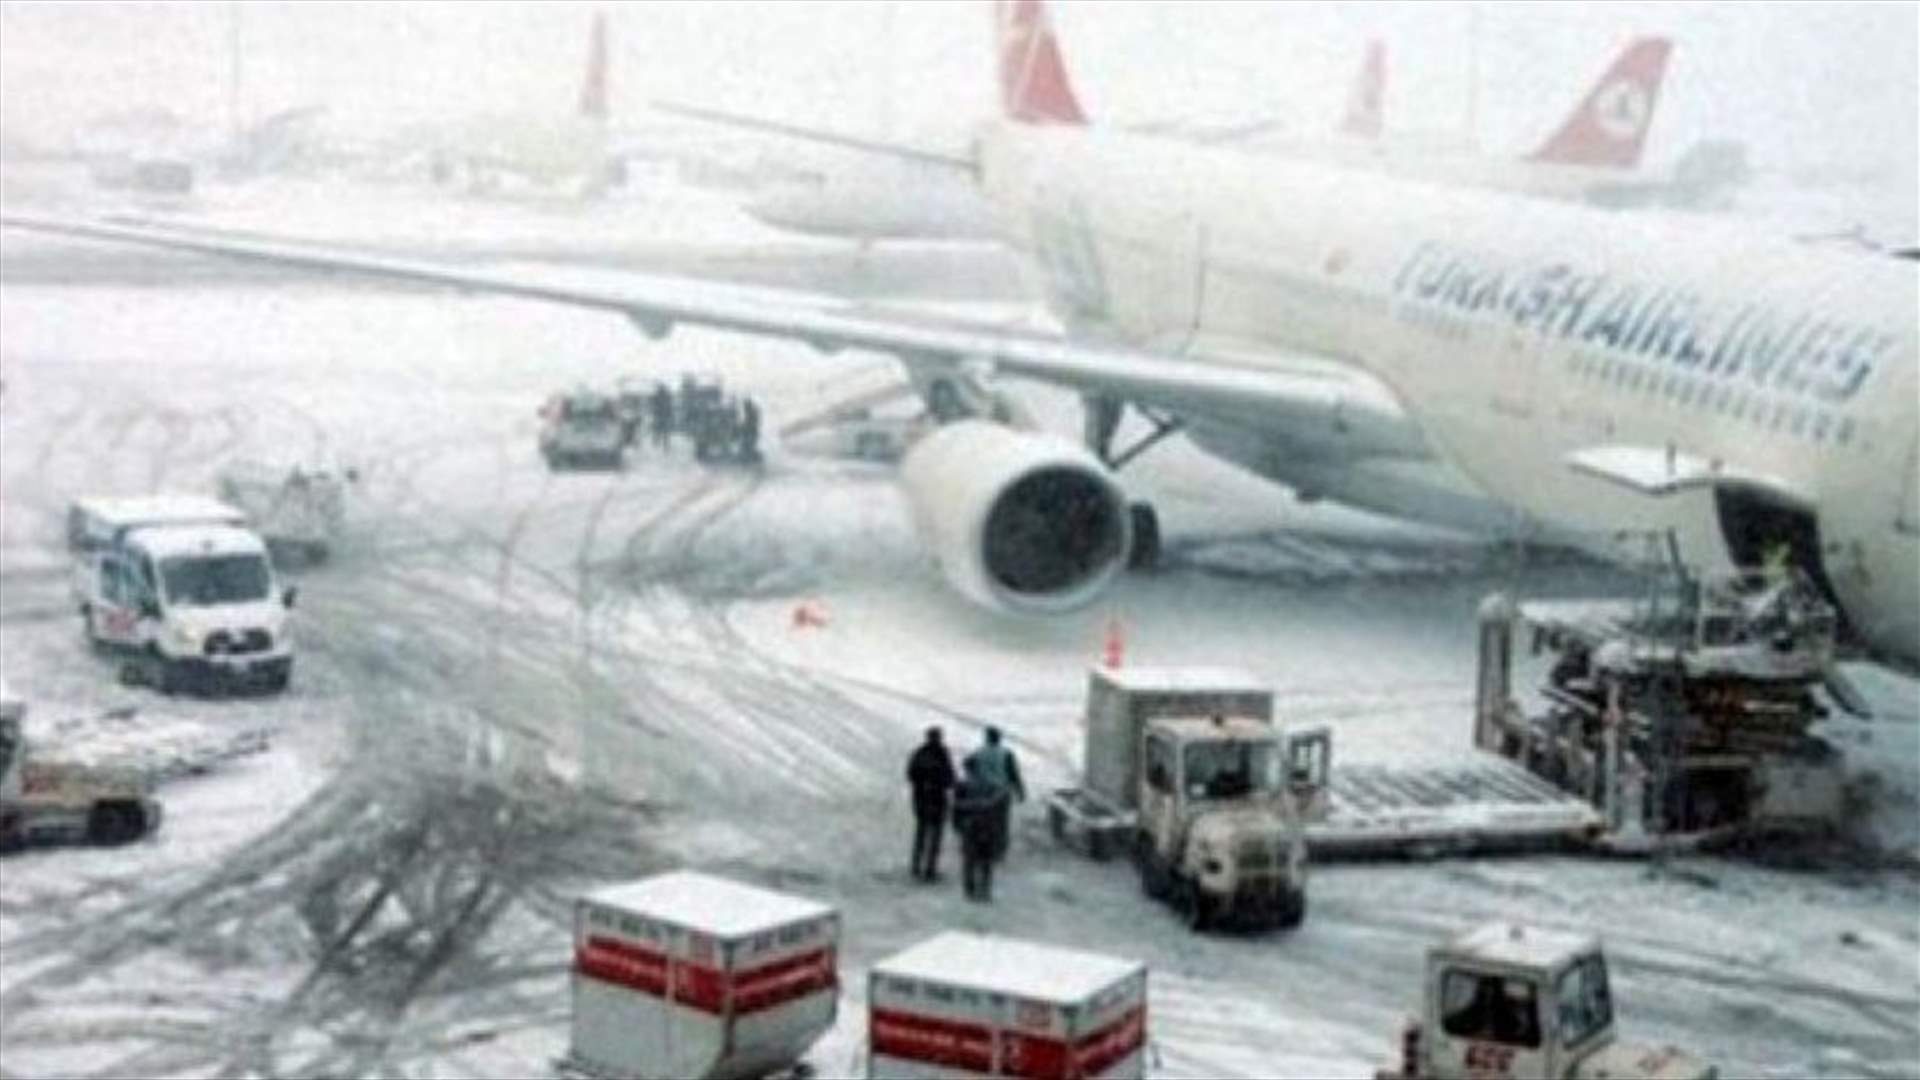 Snowstorm hits traffic in Istanbul; straits closed, flights cancelled